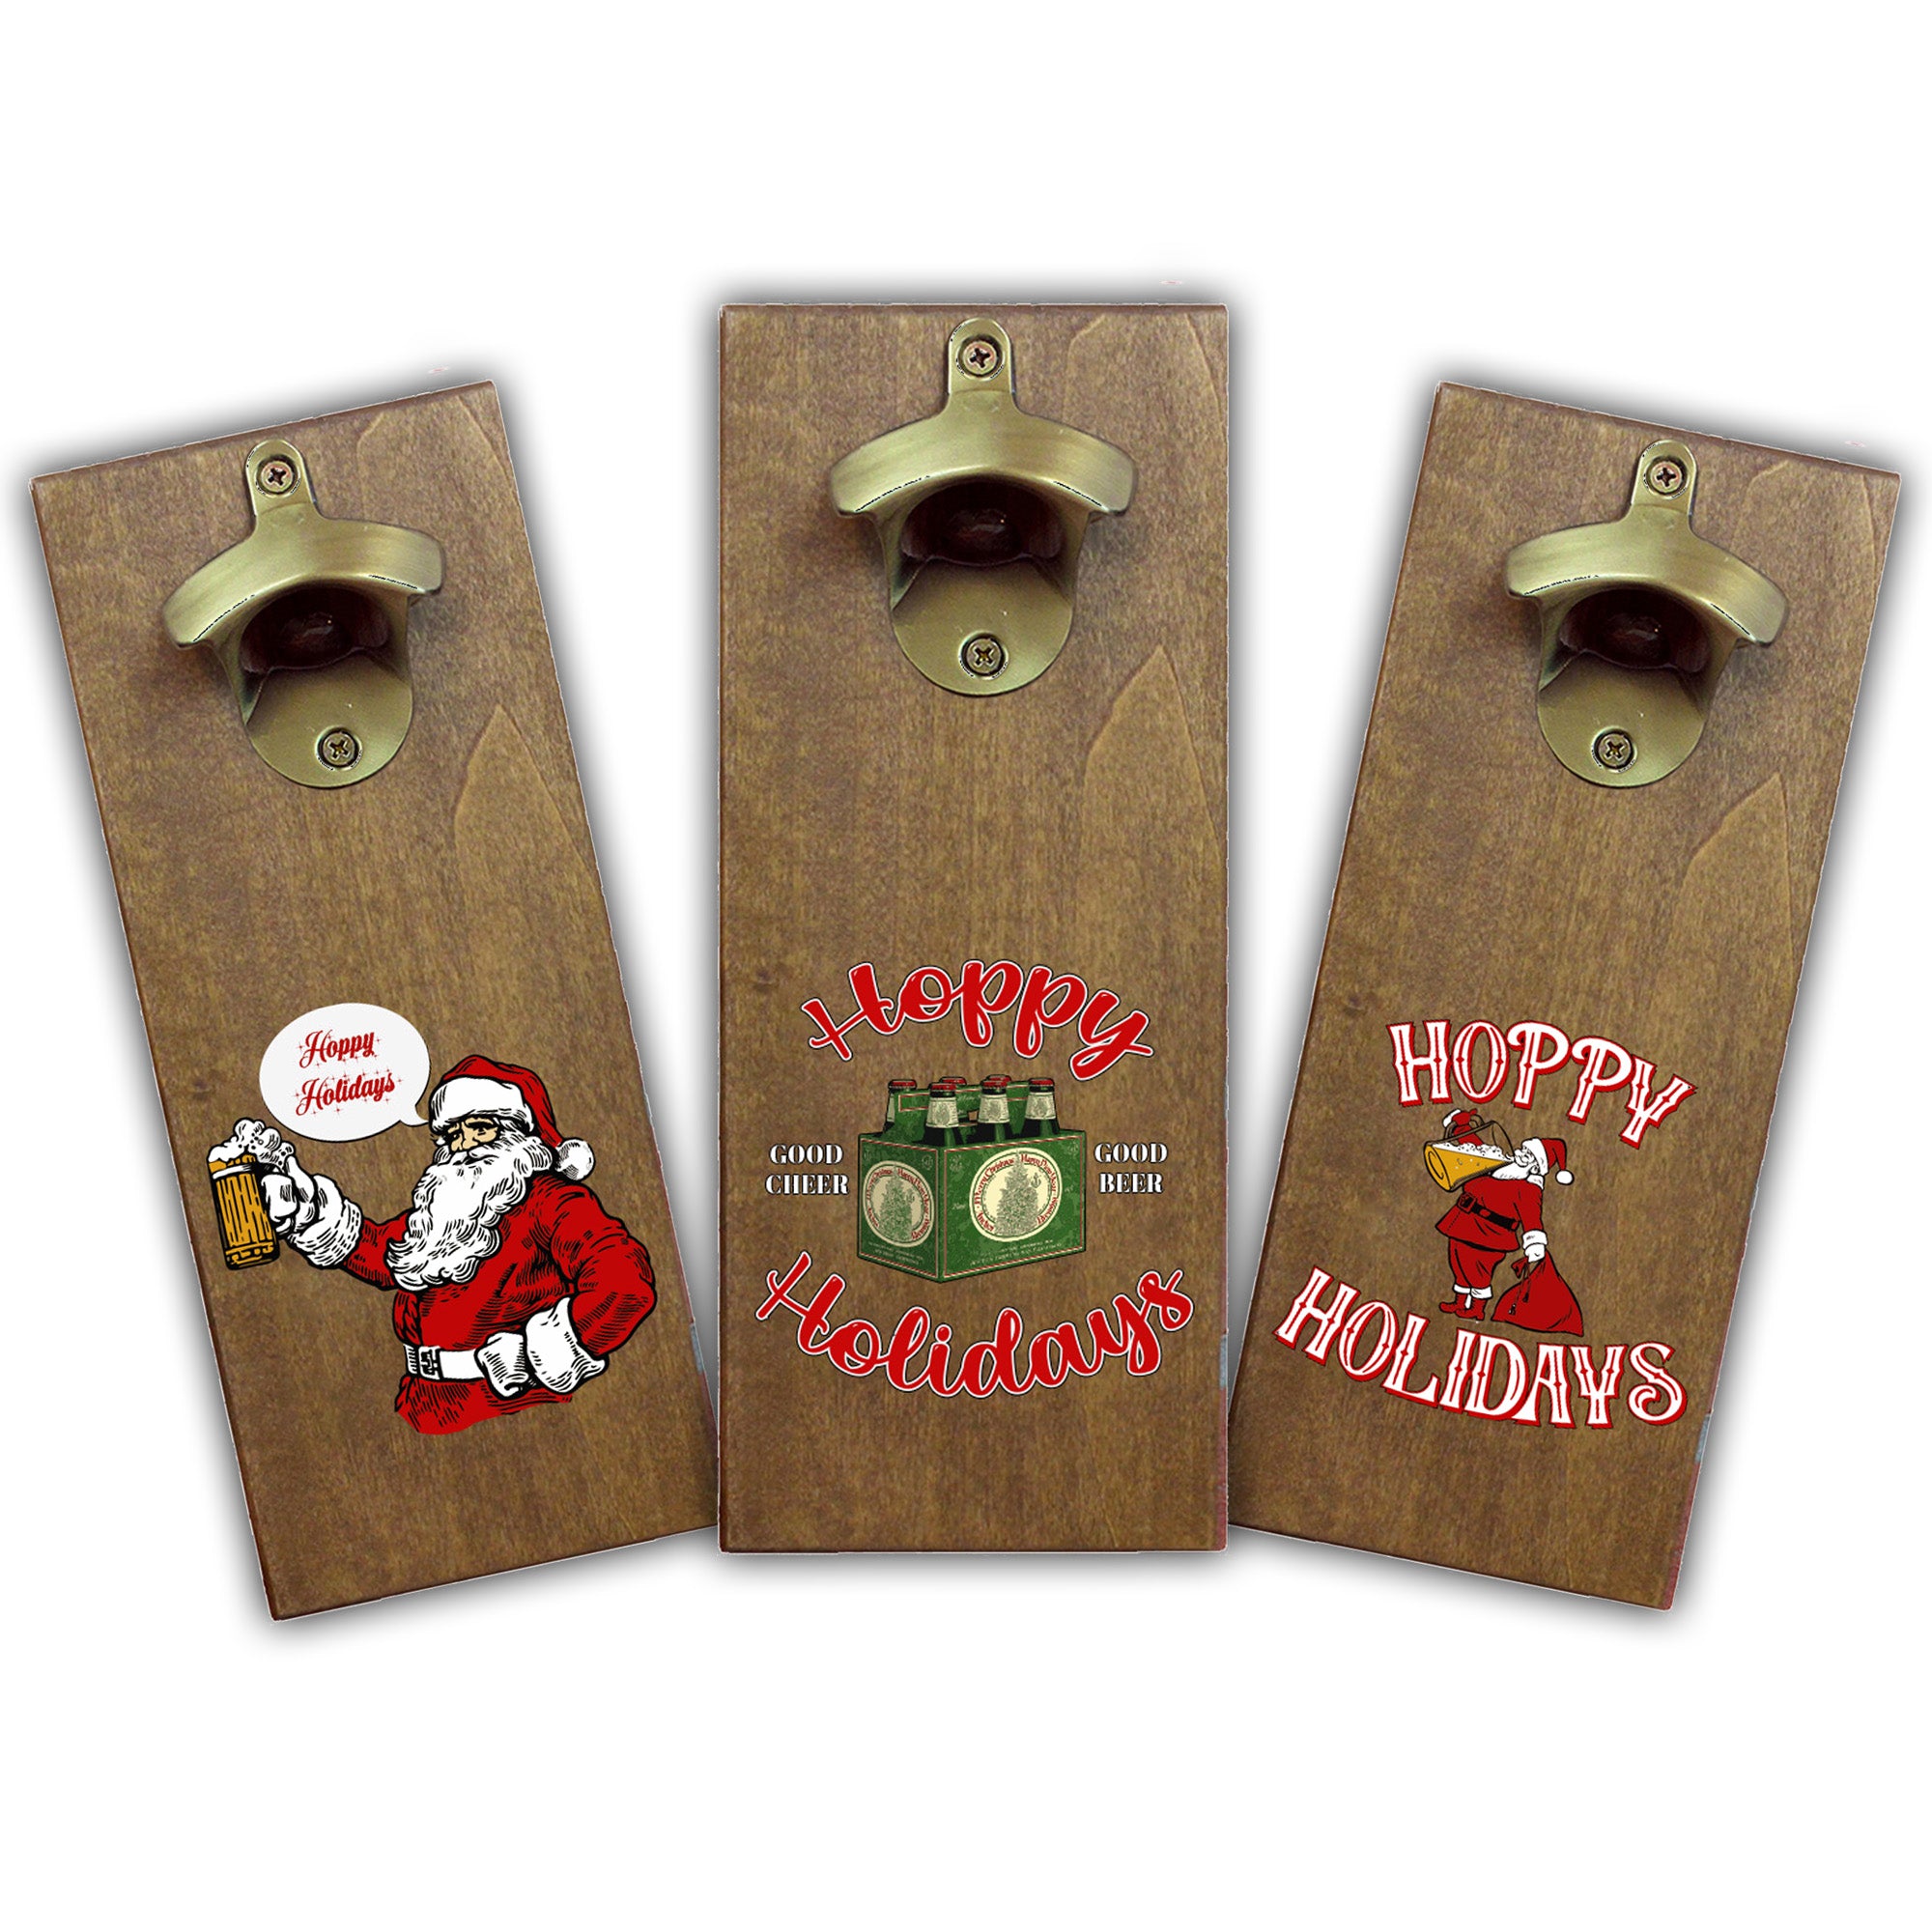 Hoppy Holidays Wall Mounted Bottle Openers - 3 Designs Available